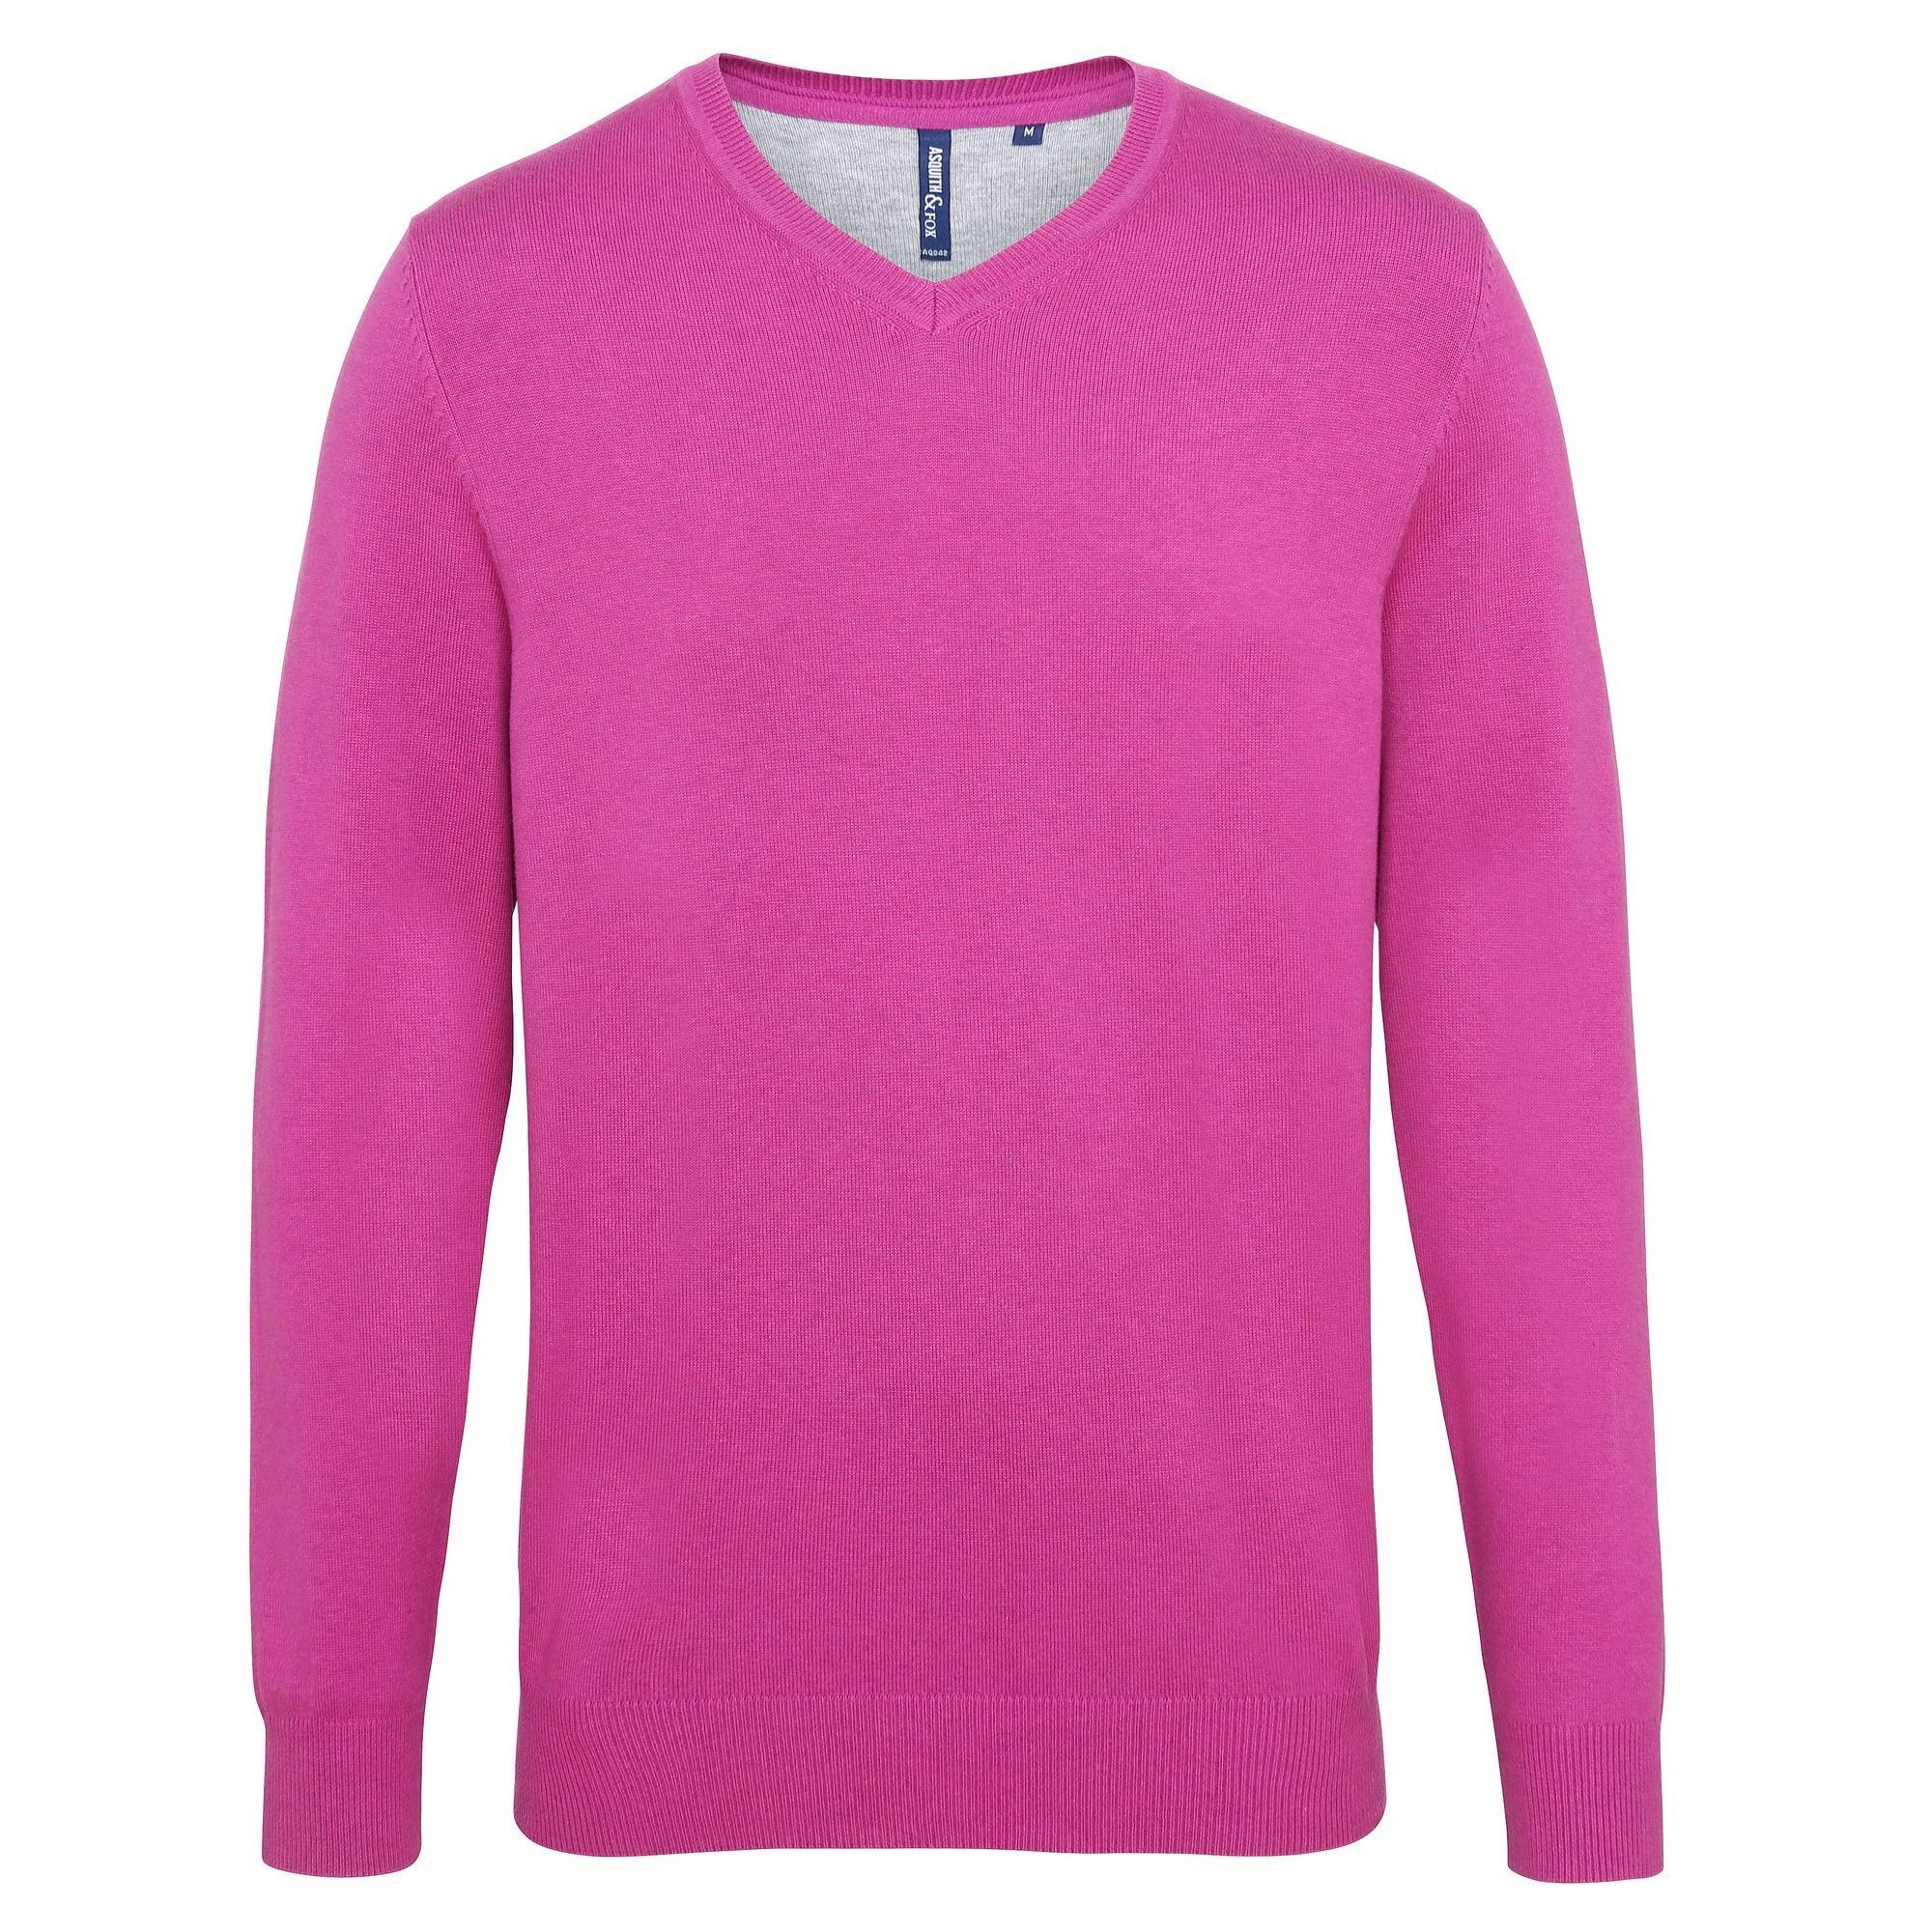 Asquith & Fox Mens Cotton Rich V-Neck Sweater (Orchid Heather) (XL)